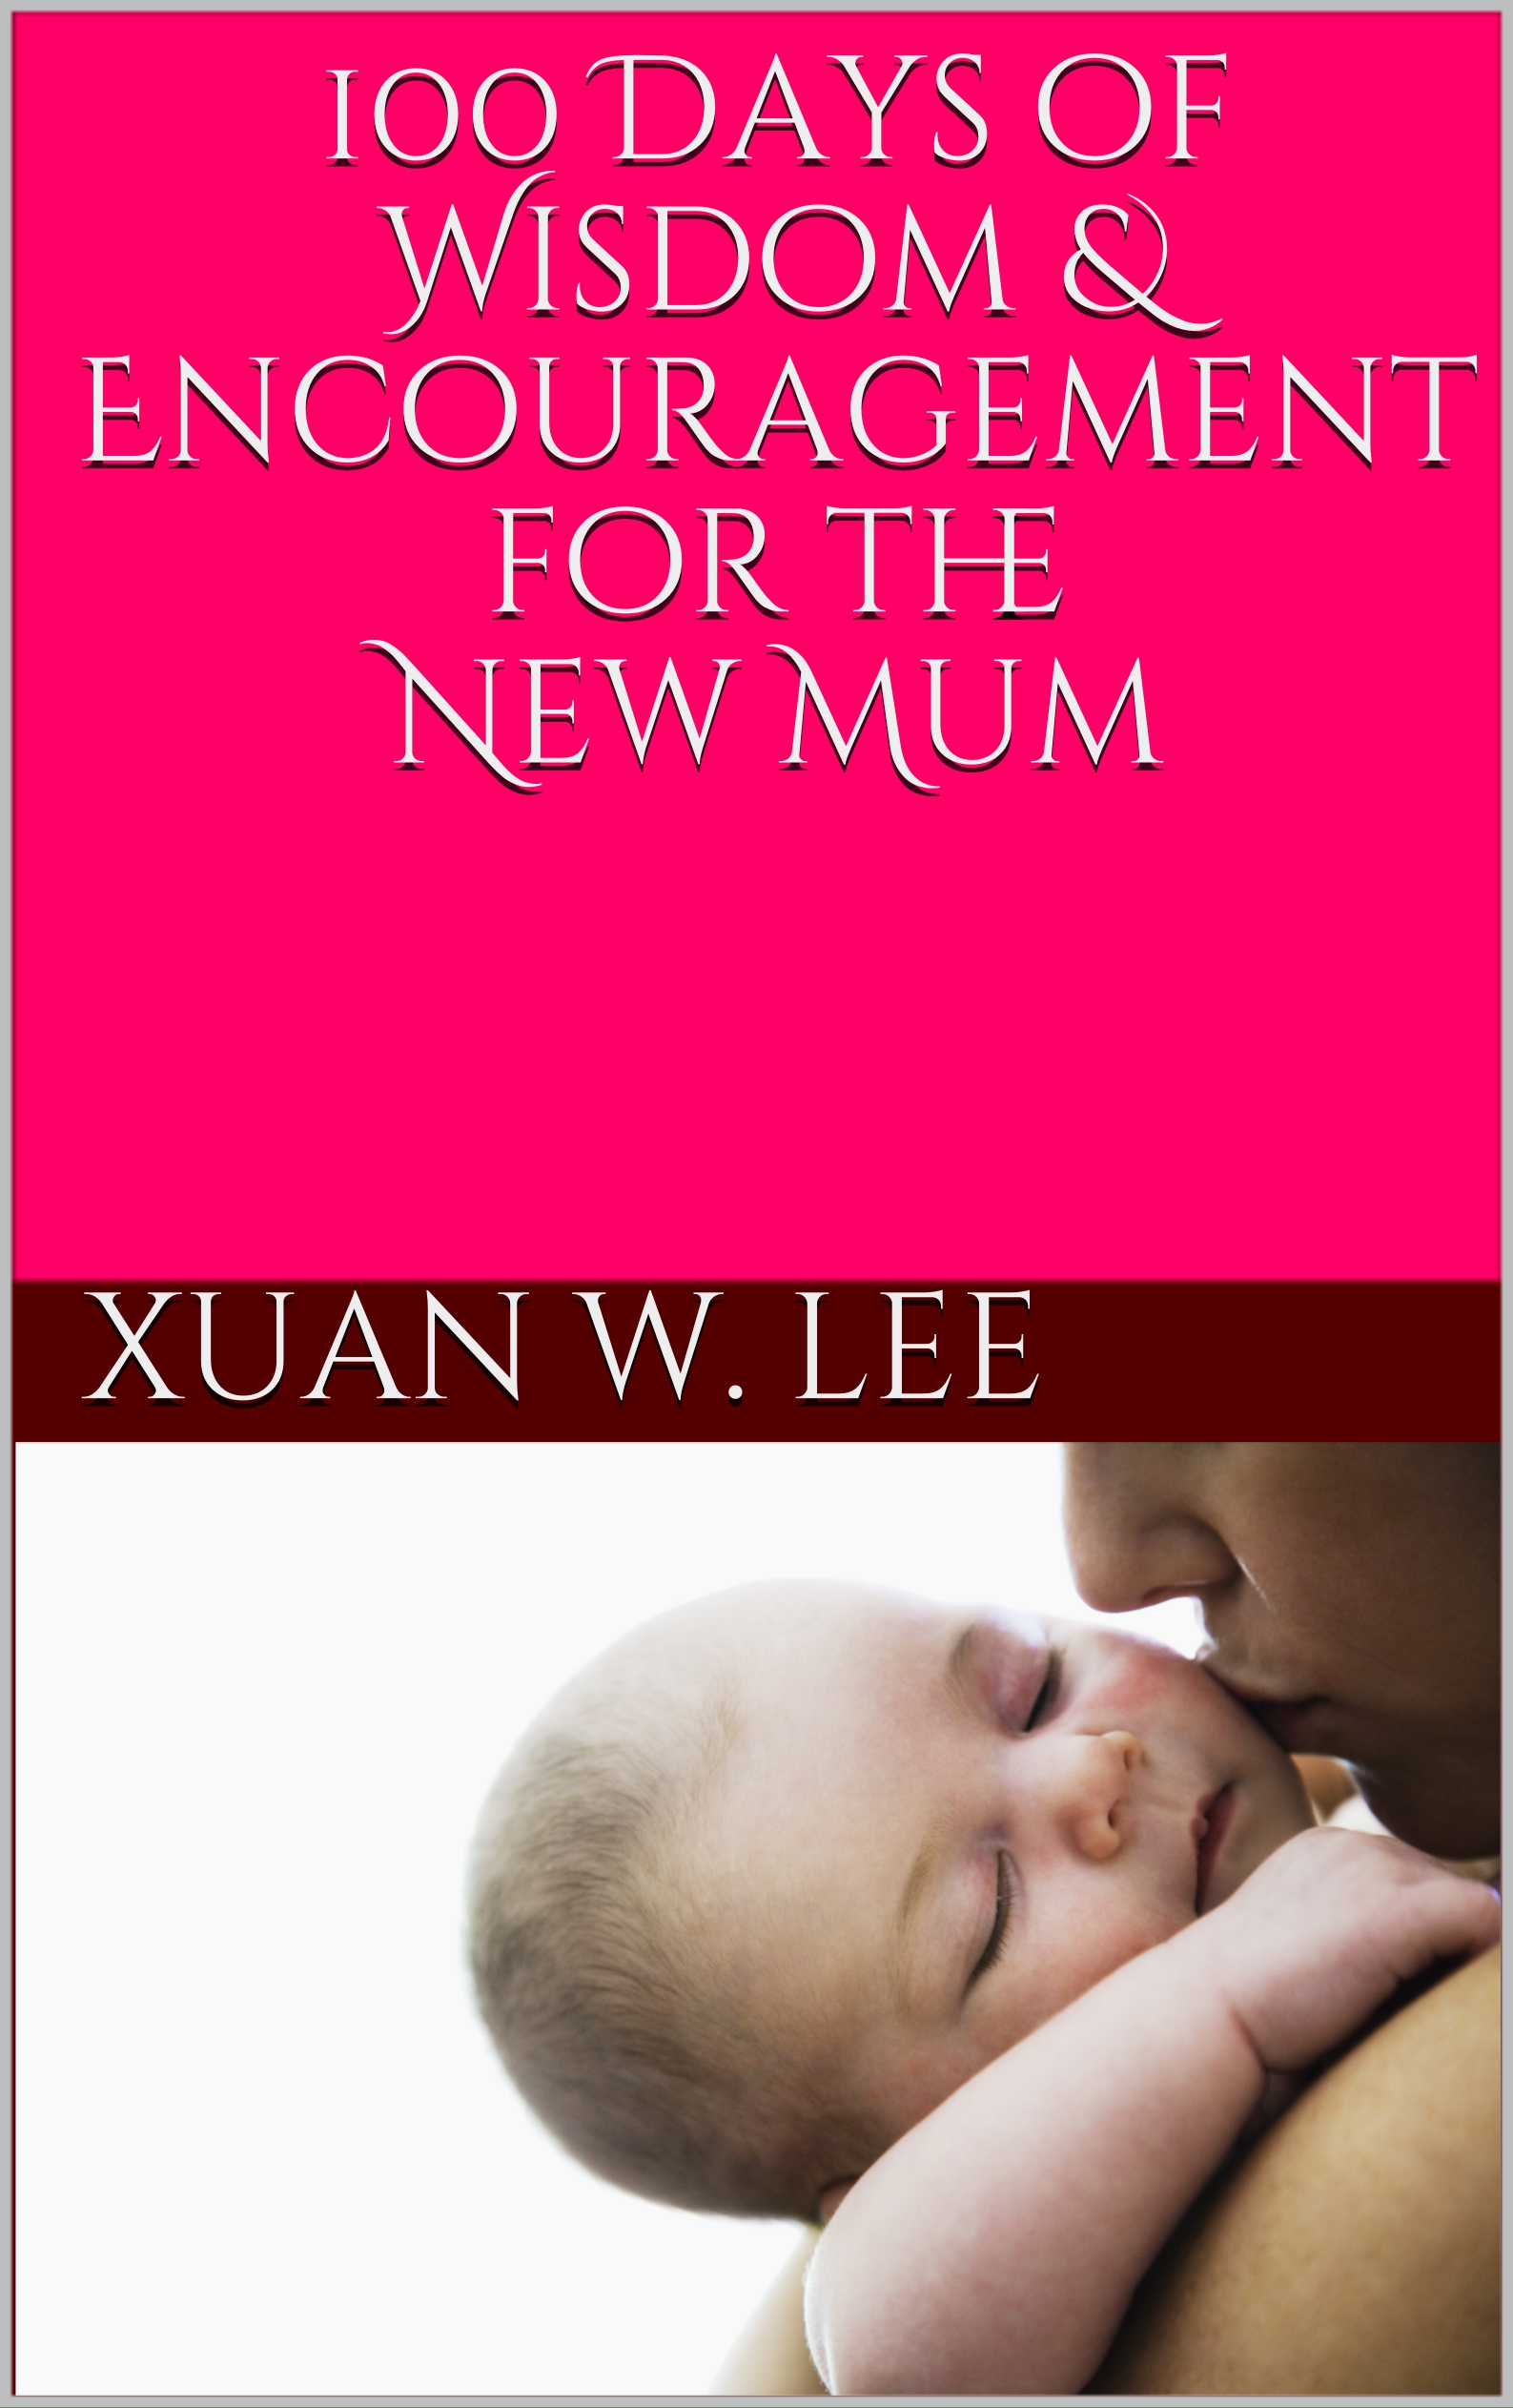 FREE: 100 Days of Wisdom and Encouragement for the New Mum by Xuan W. Lee